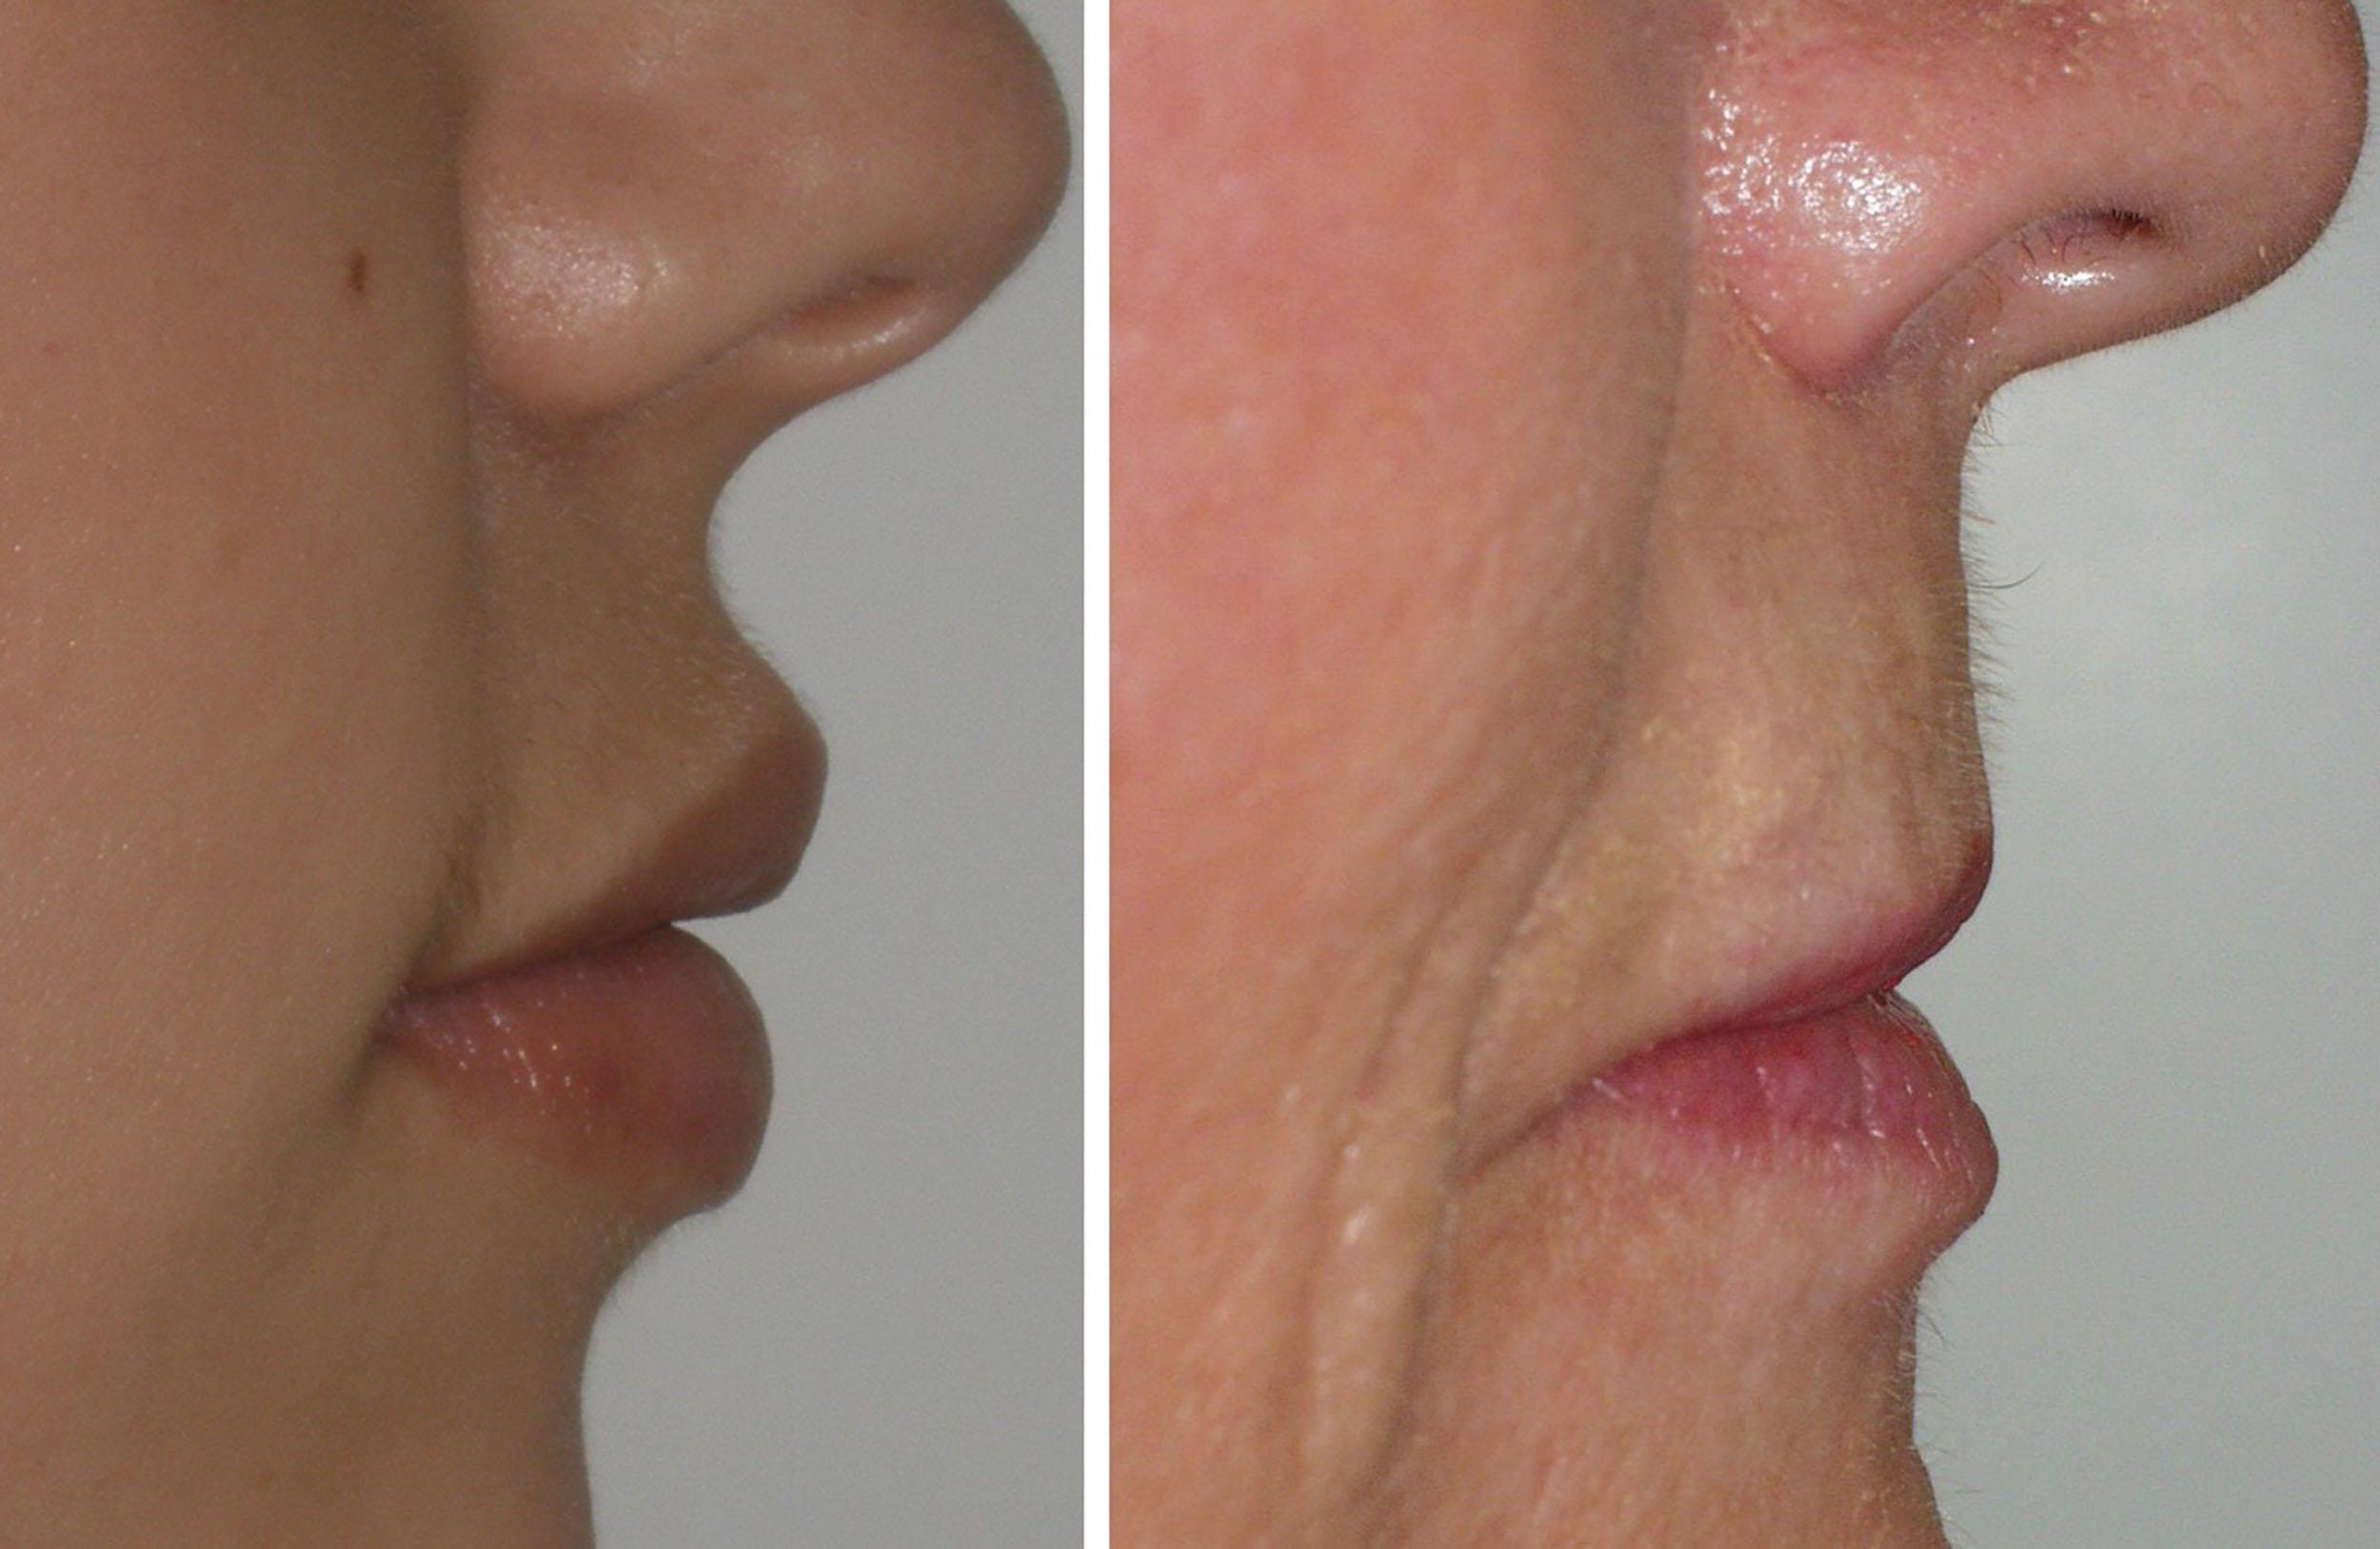 Fig. 10.10, The curvaceous and volumized aspect ratio of a youthful lip (left) and a senescent lip with loss of volume fullness texture and structure (right) are shown. Augmenting a youthful lip is much easier and is the best procedure for novice injectors. Treating the aging lip is an art form in and of itself as many female patients want better-looking lips but not “bigger” lips.